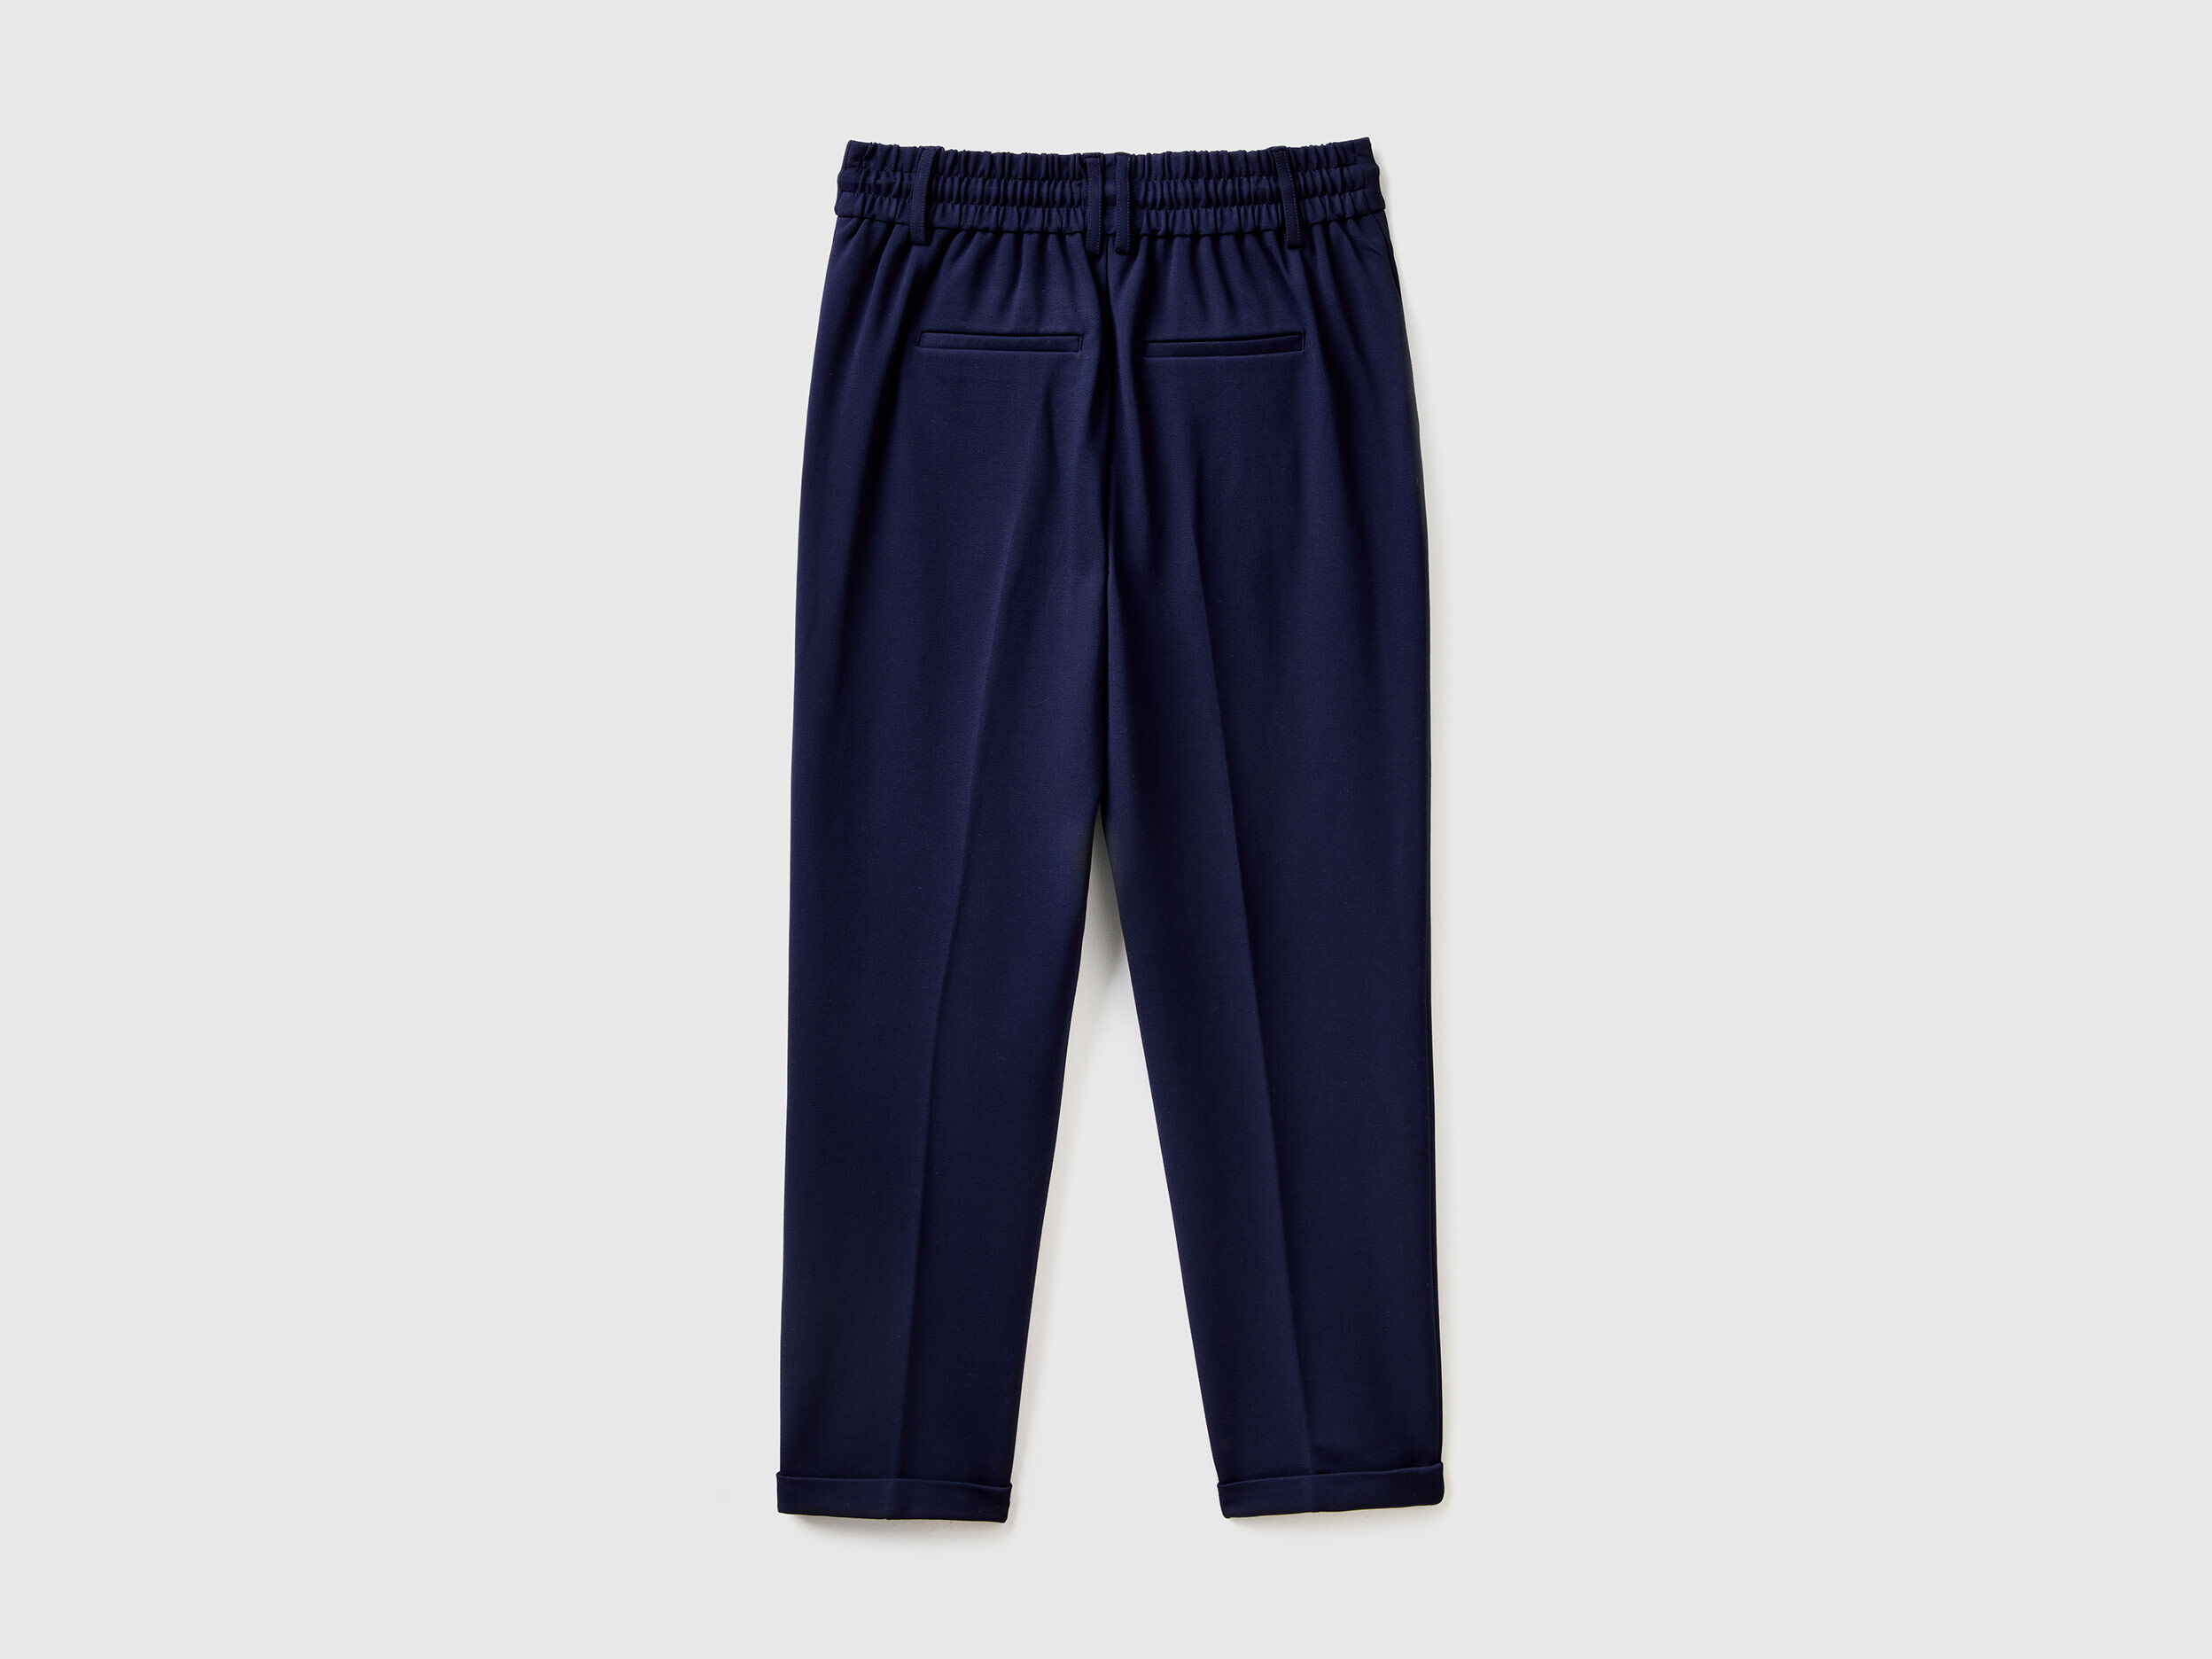 United Colors of Benetton Trousers - Boozt.com